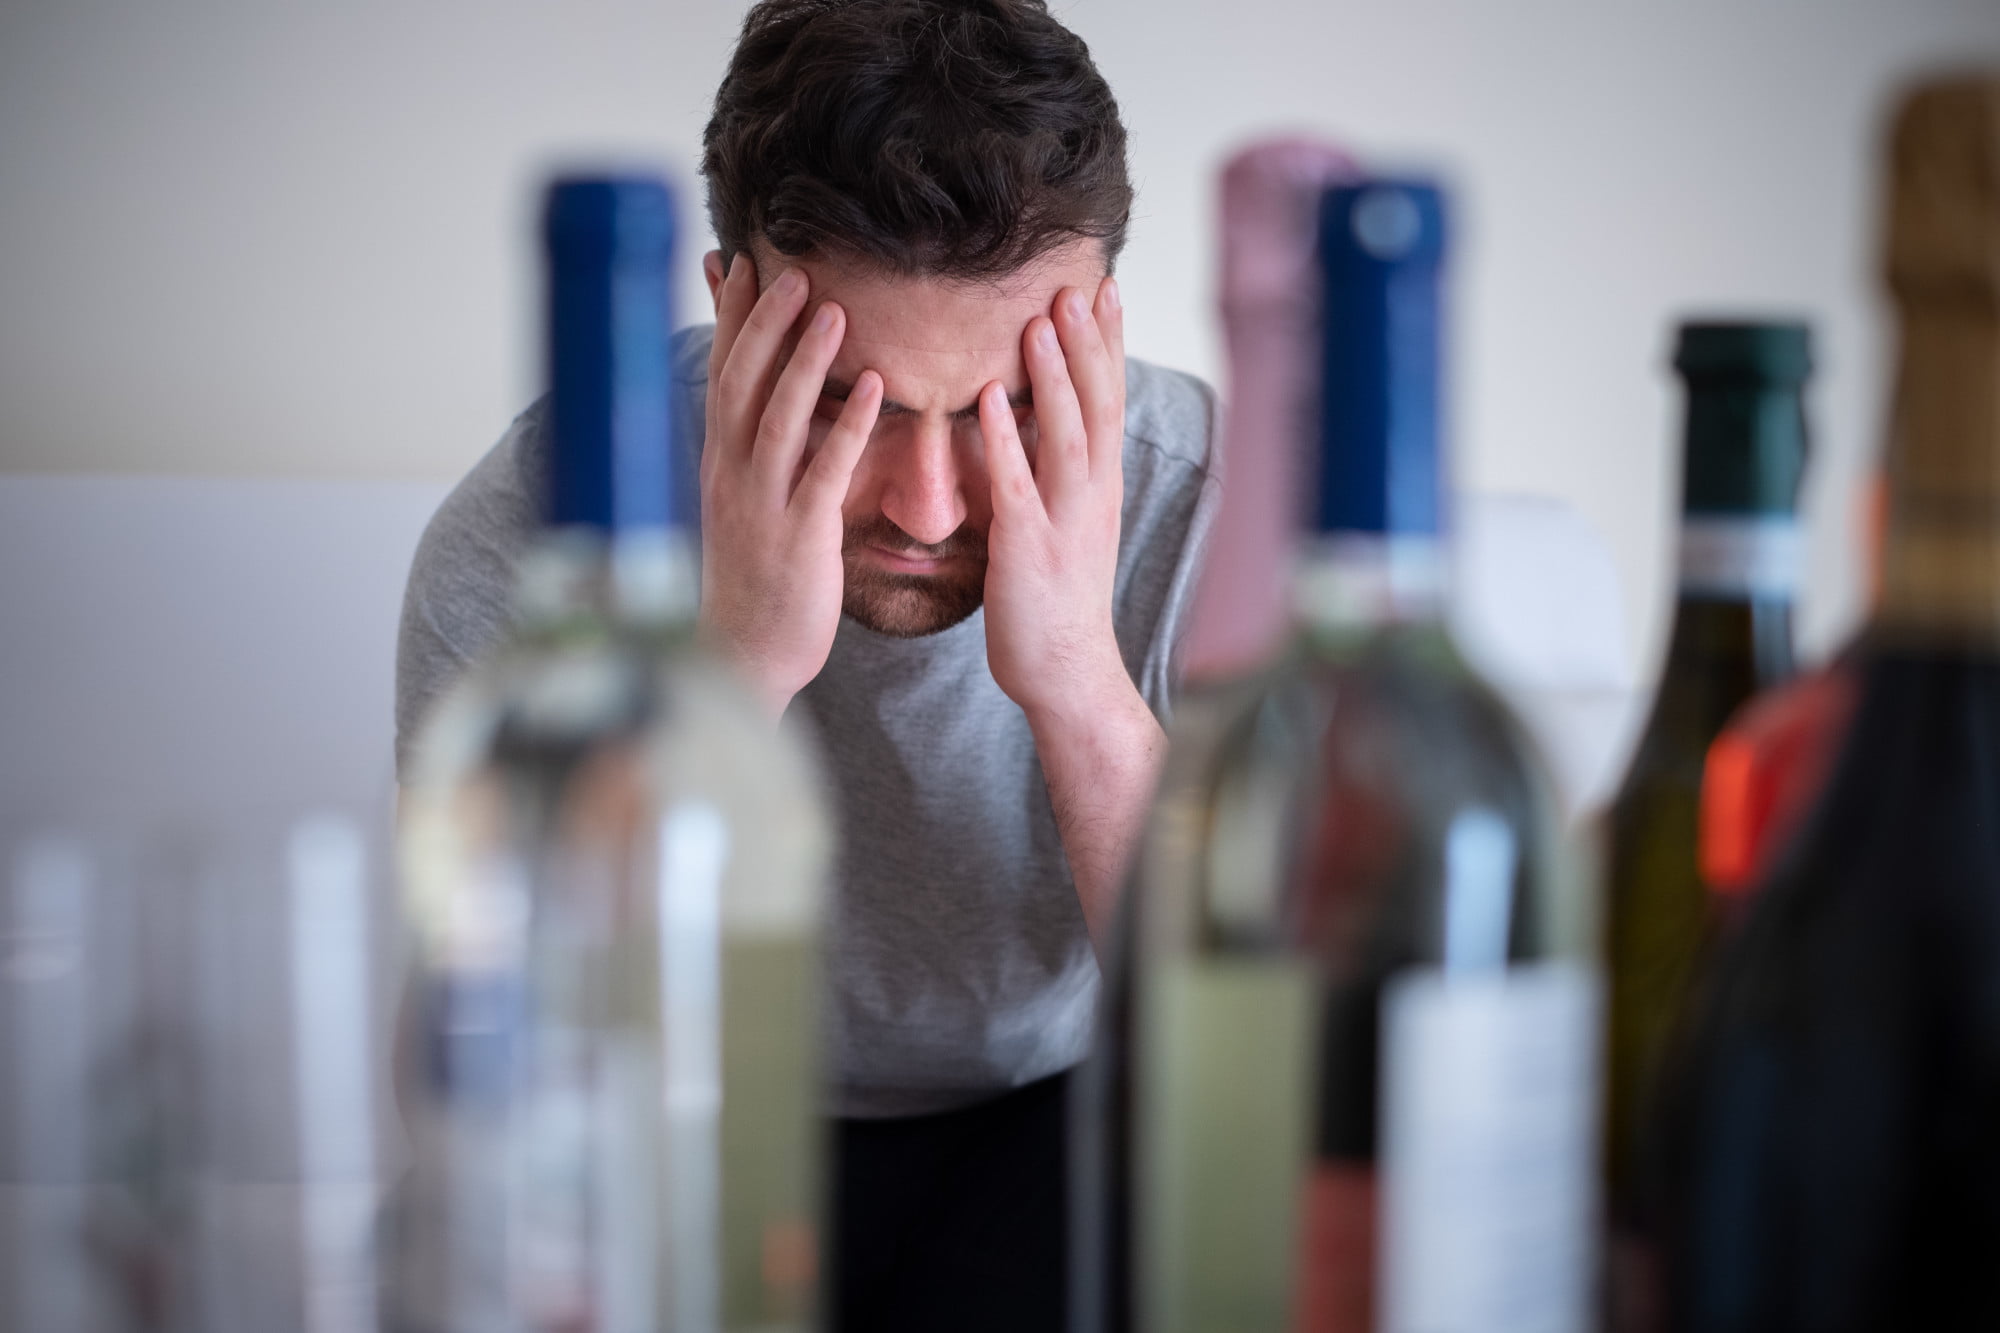 Have you ever asked yourself the question: what is considered alcohol abuse? Read on to learn more, including its symptoms, diagnosis, and treatment.